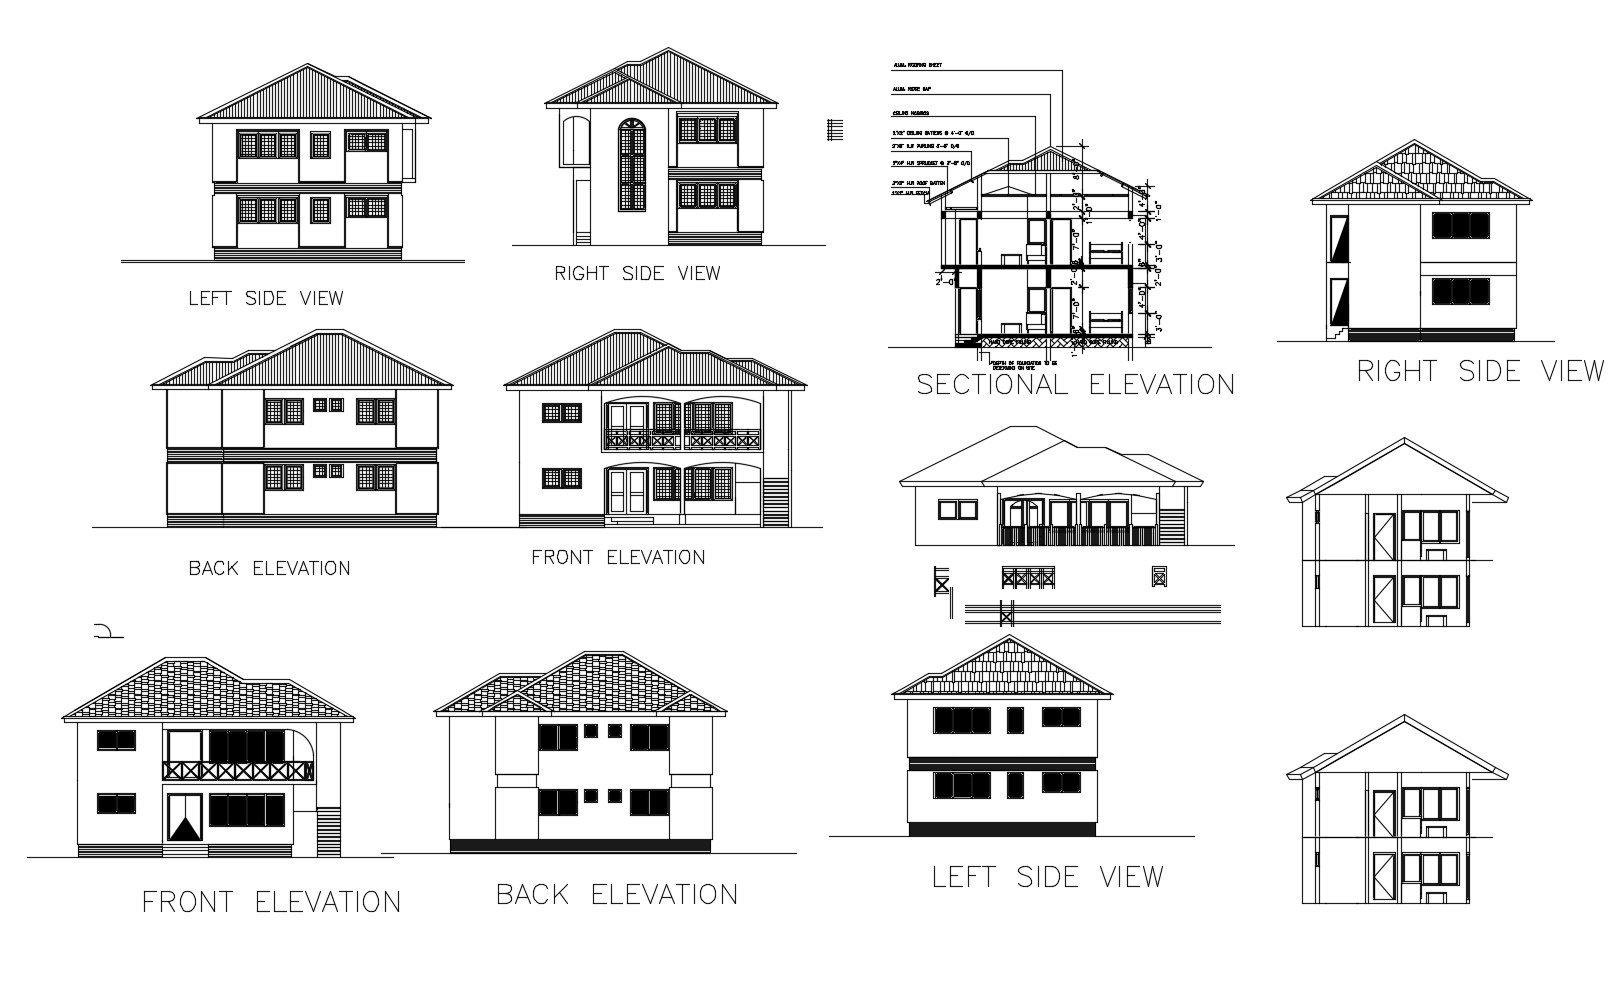 Drawing of house plan with elevation details in dwg file - Cadbull